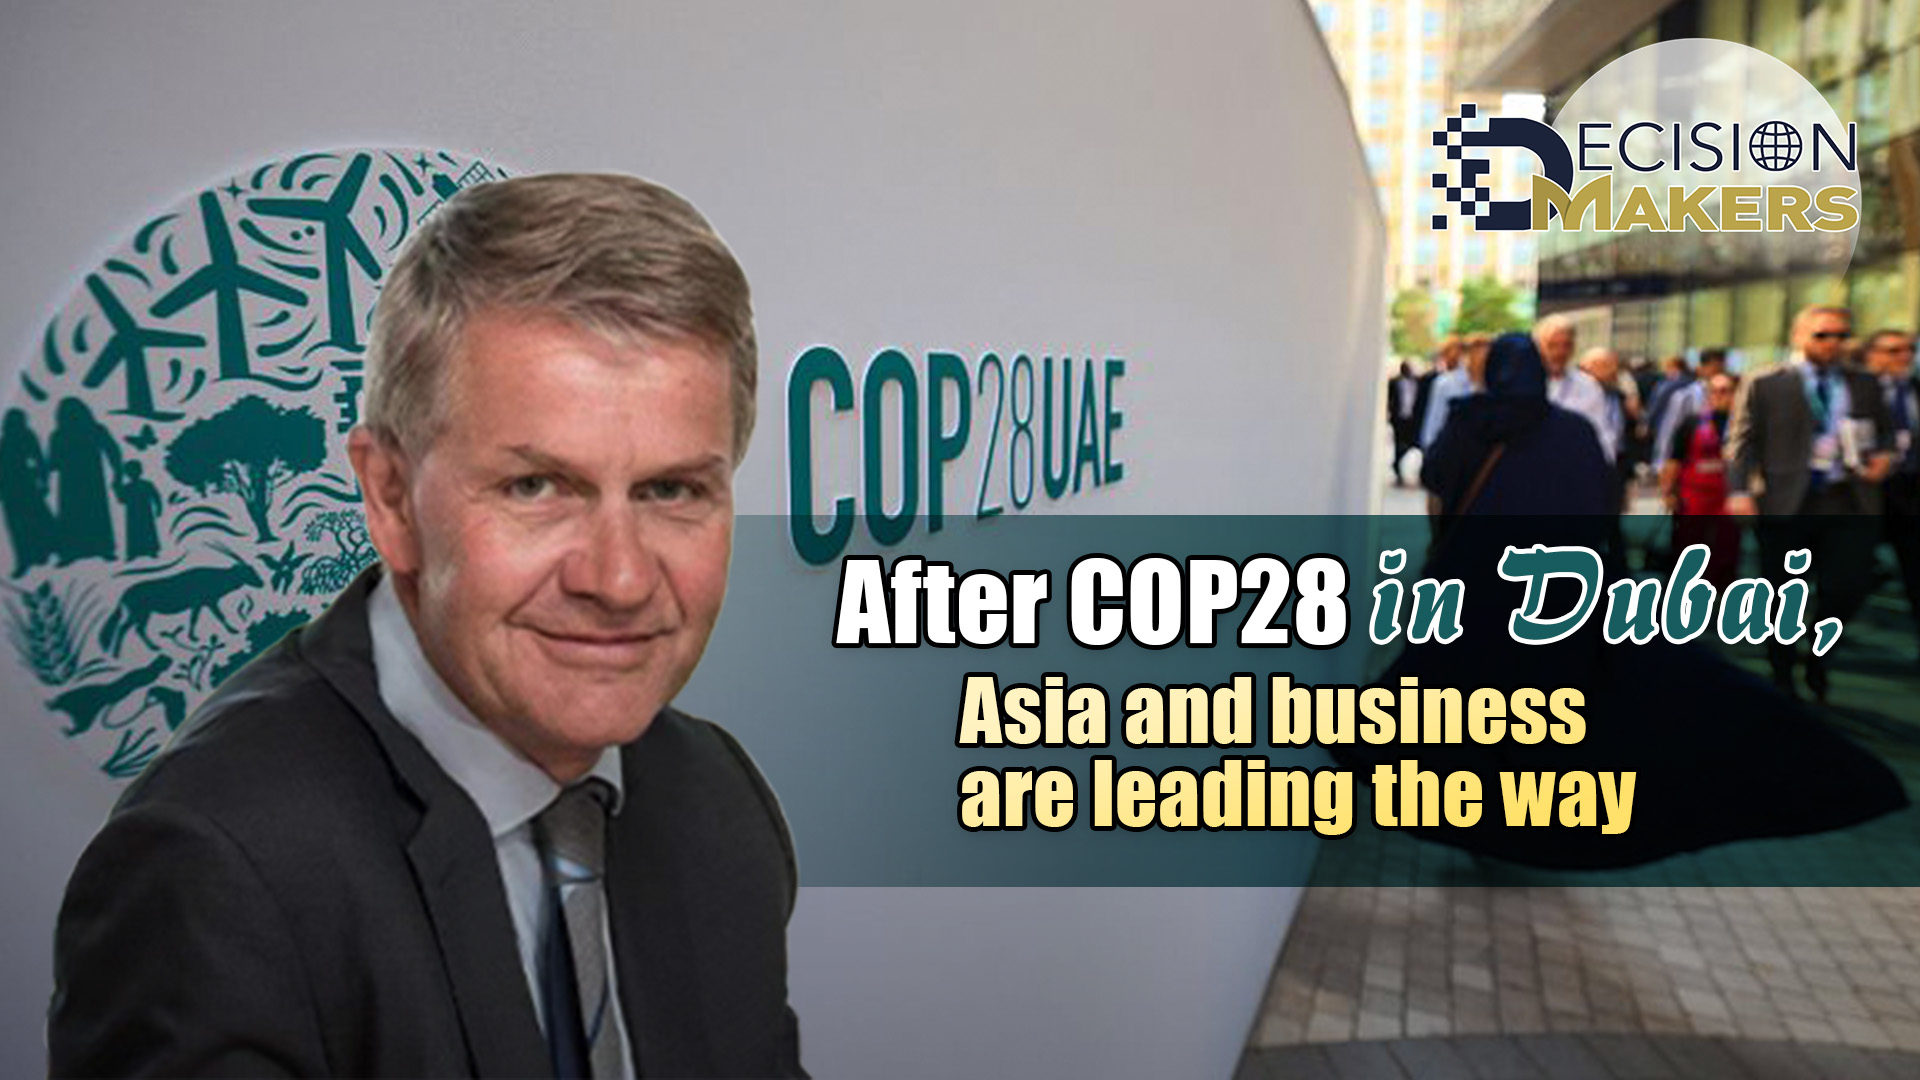 After COP28 in Dubai, Asia and business are leading the way